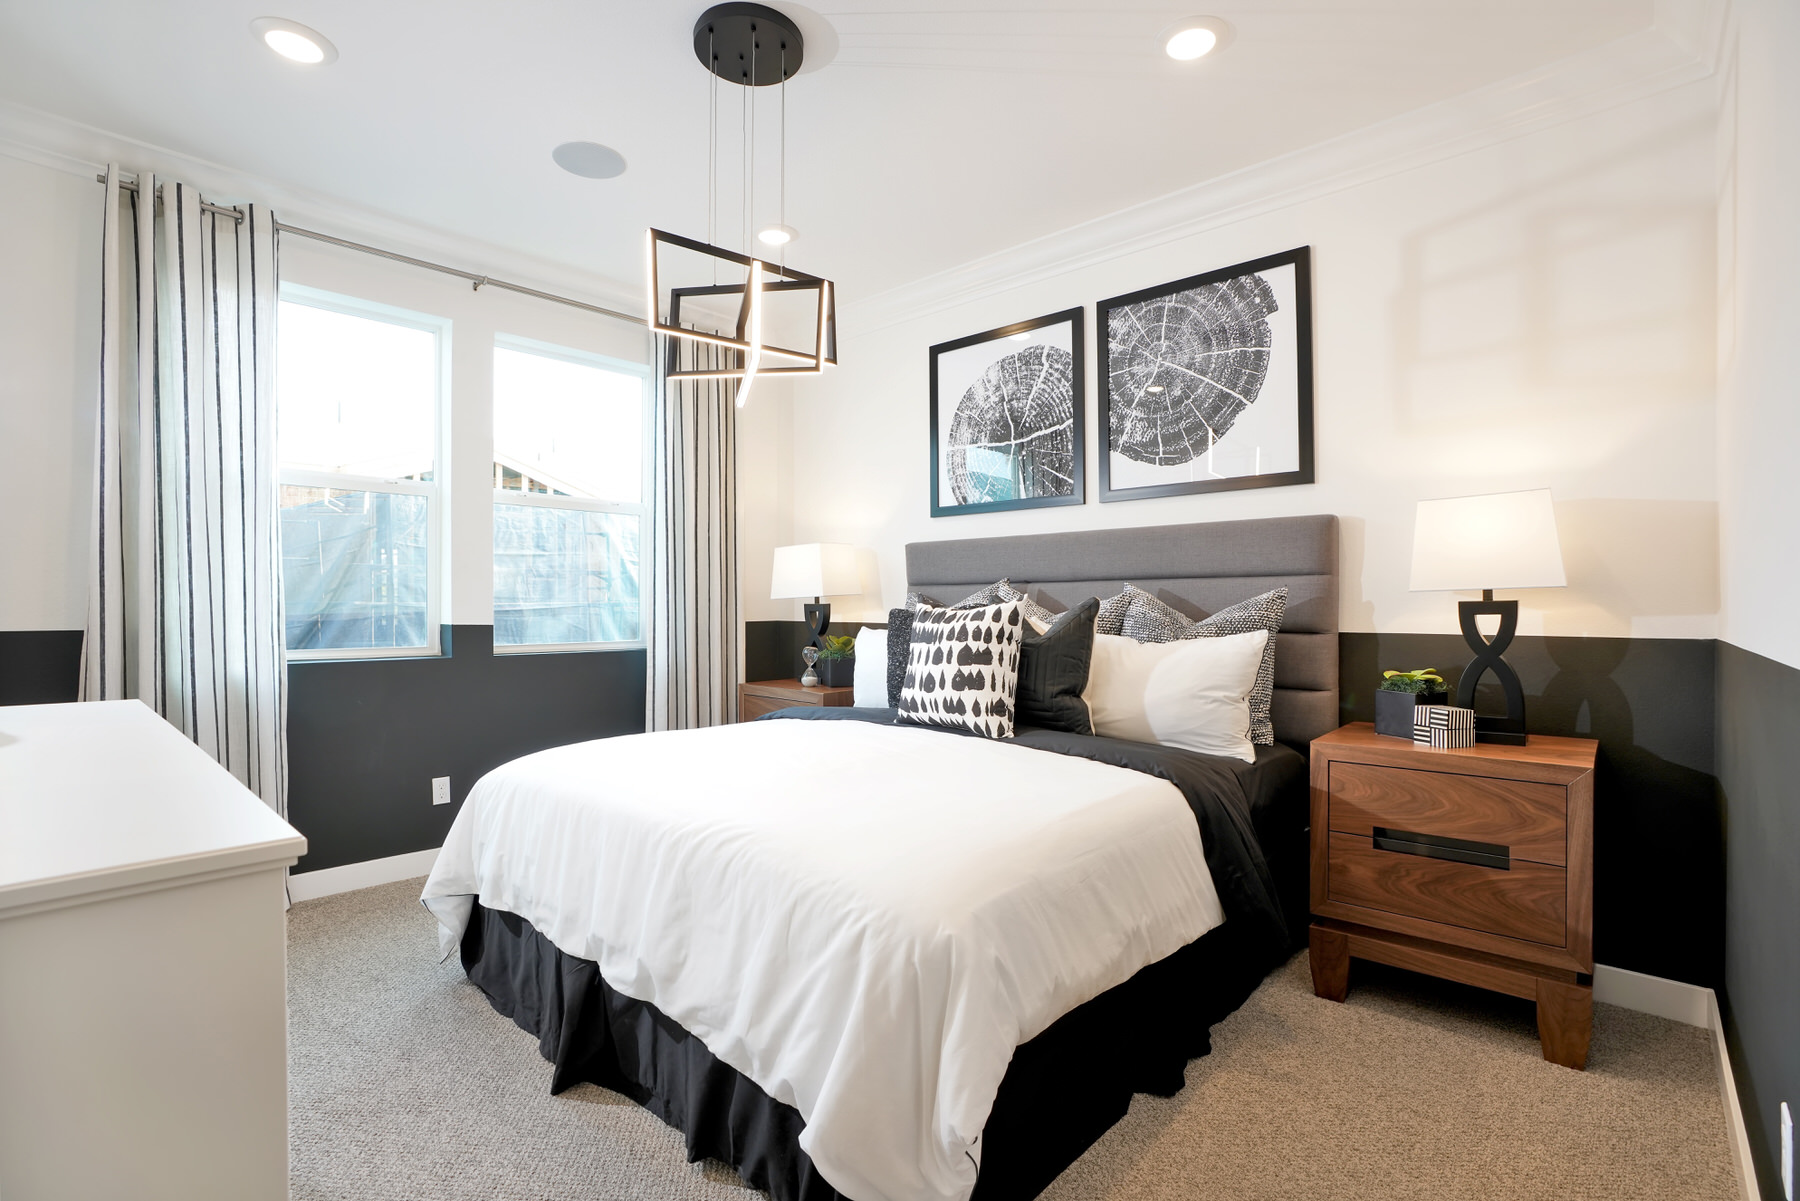 Primary Bedroom in Plan 1 at Townes at Magnolia by Melia Homes in Anaheim, CA